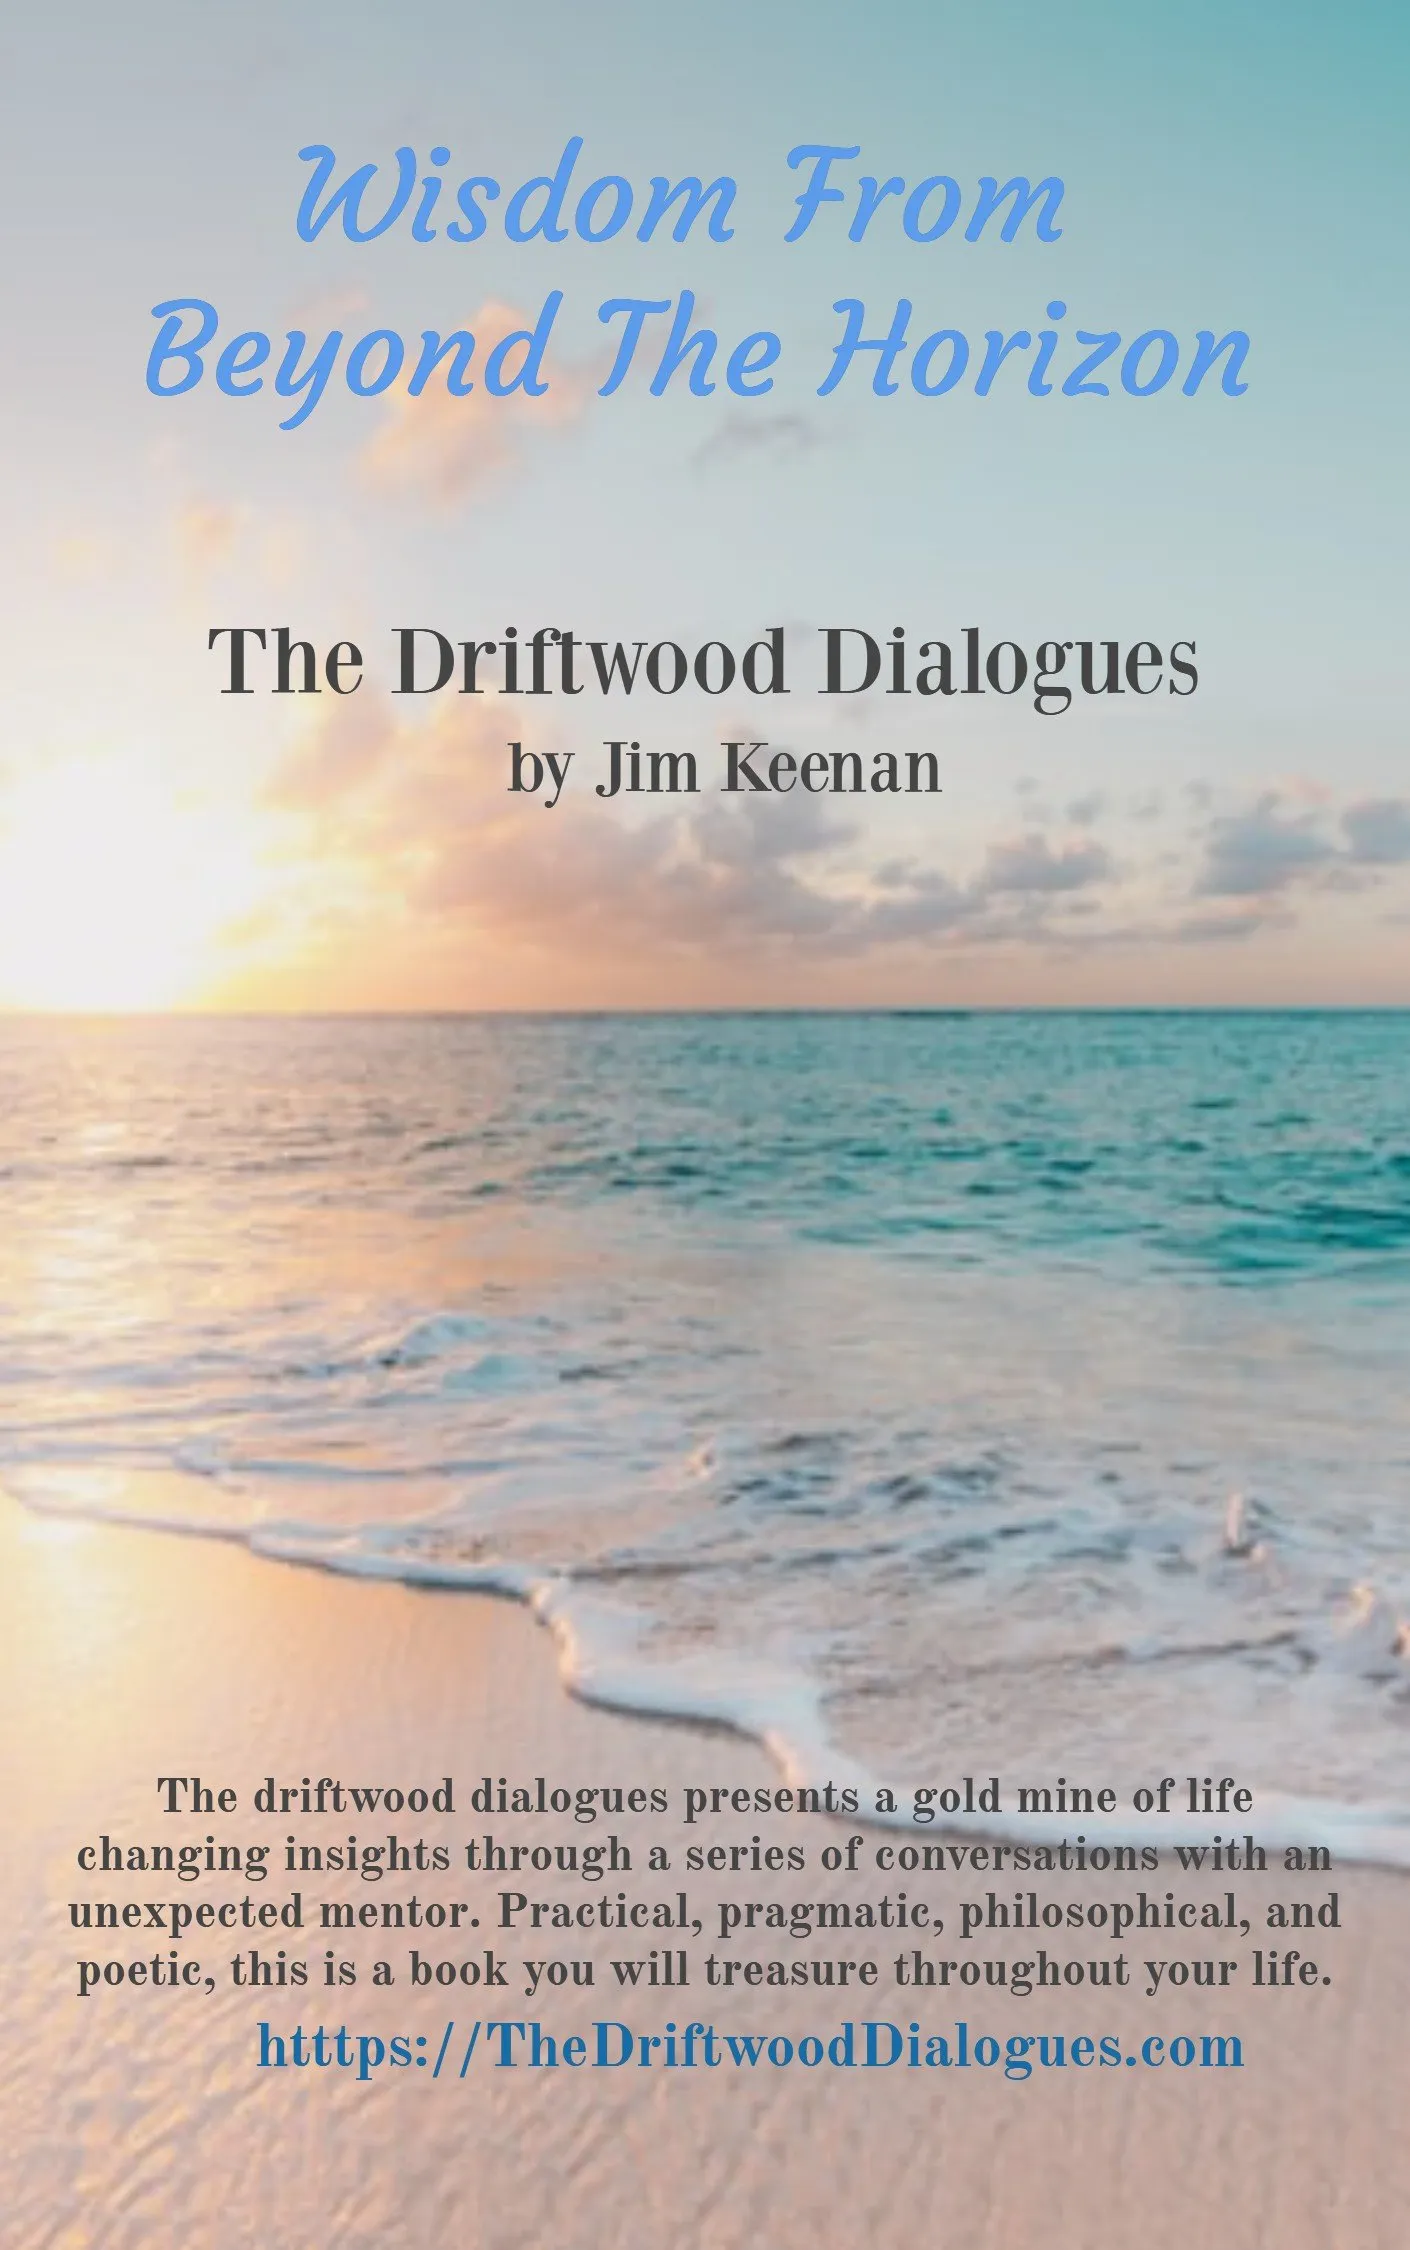 The Driftwood Dialogues Wisdom From Beyond the Horizon by Jim Keenan The Poet With A Point